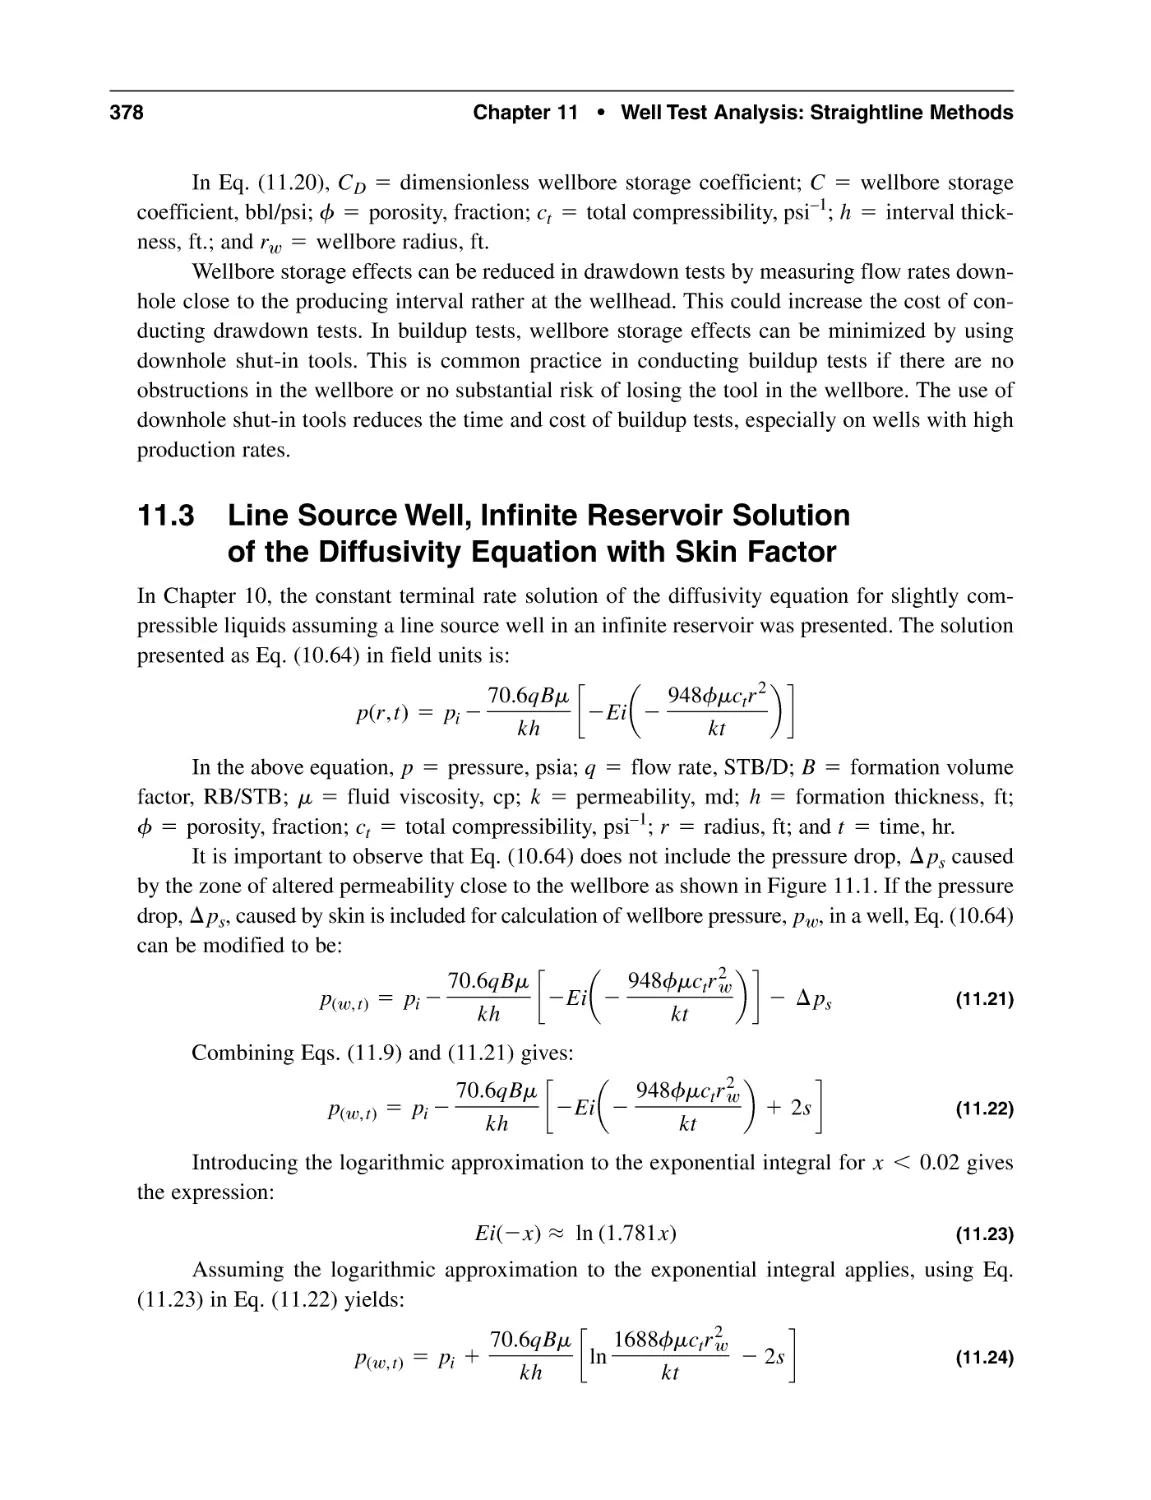 11.3 Line Source Well, Infinite Reservoir Solution of the Diffusivity Equation with Skin Factor